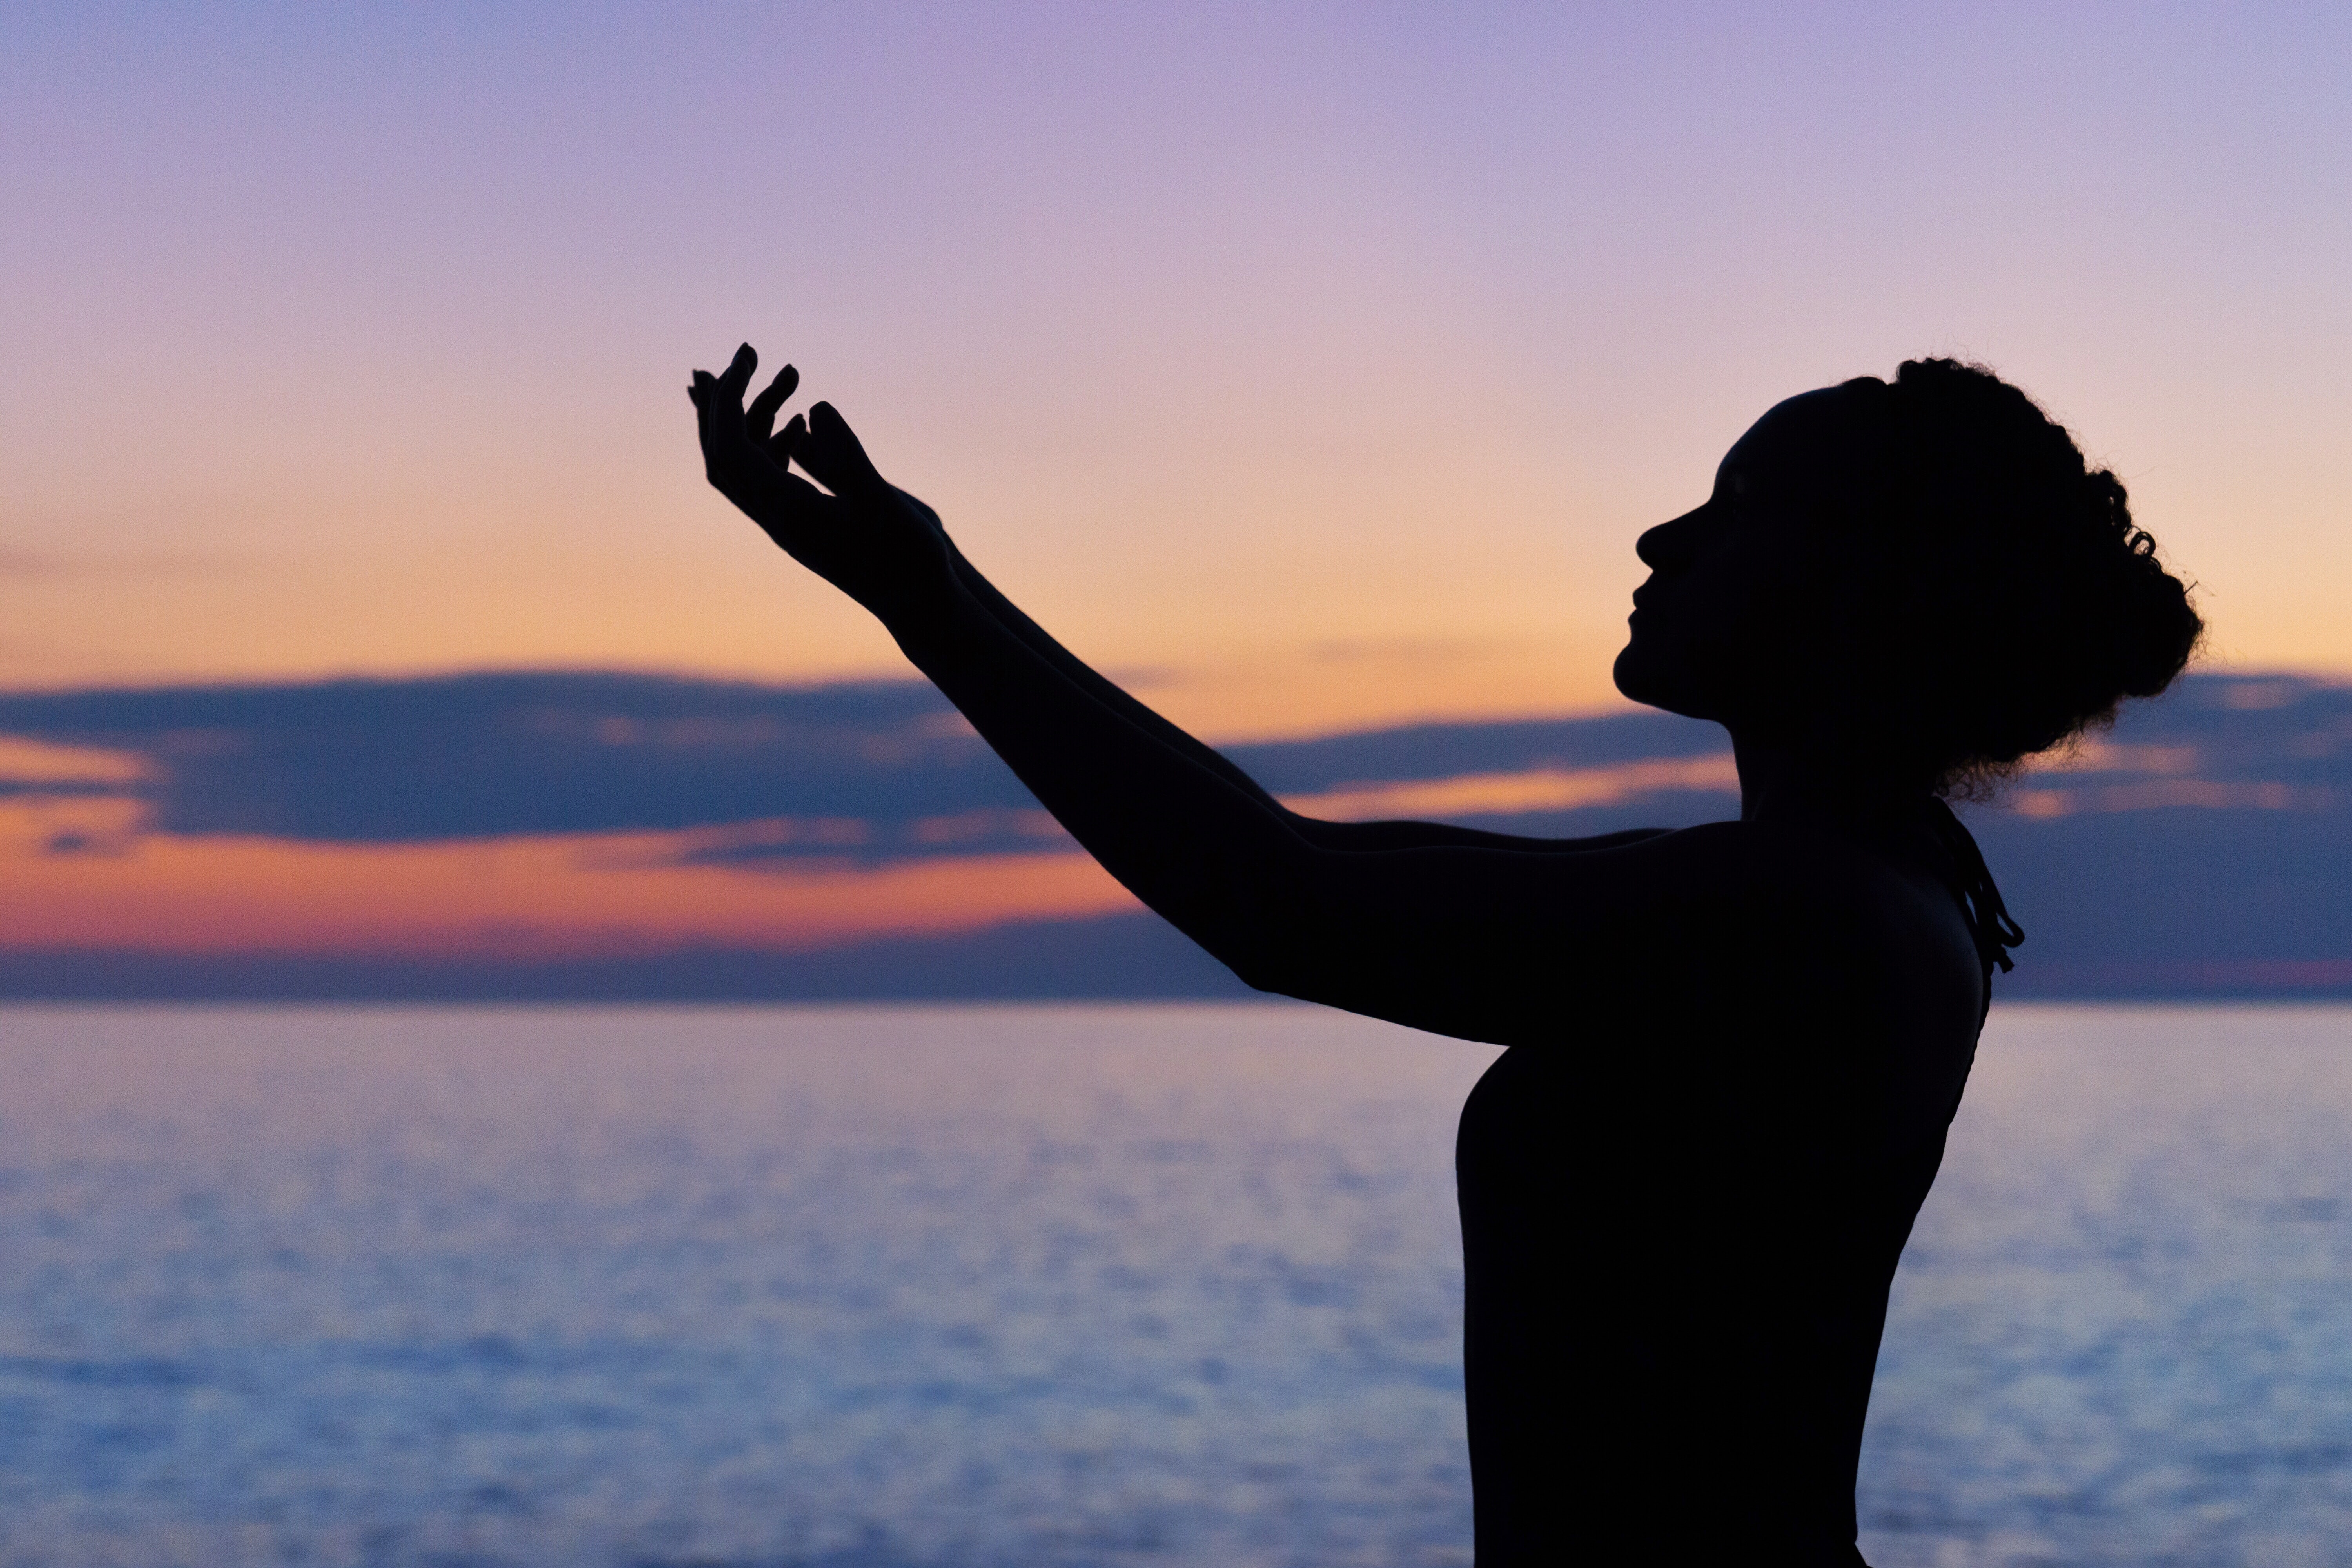 silhouette of a woman with arms raised to the sky, water in the background